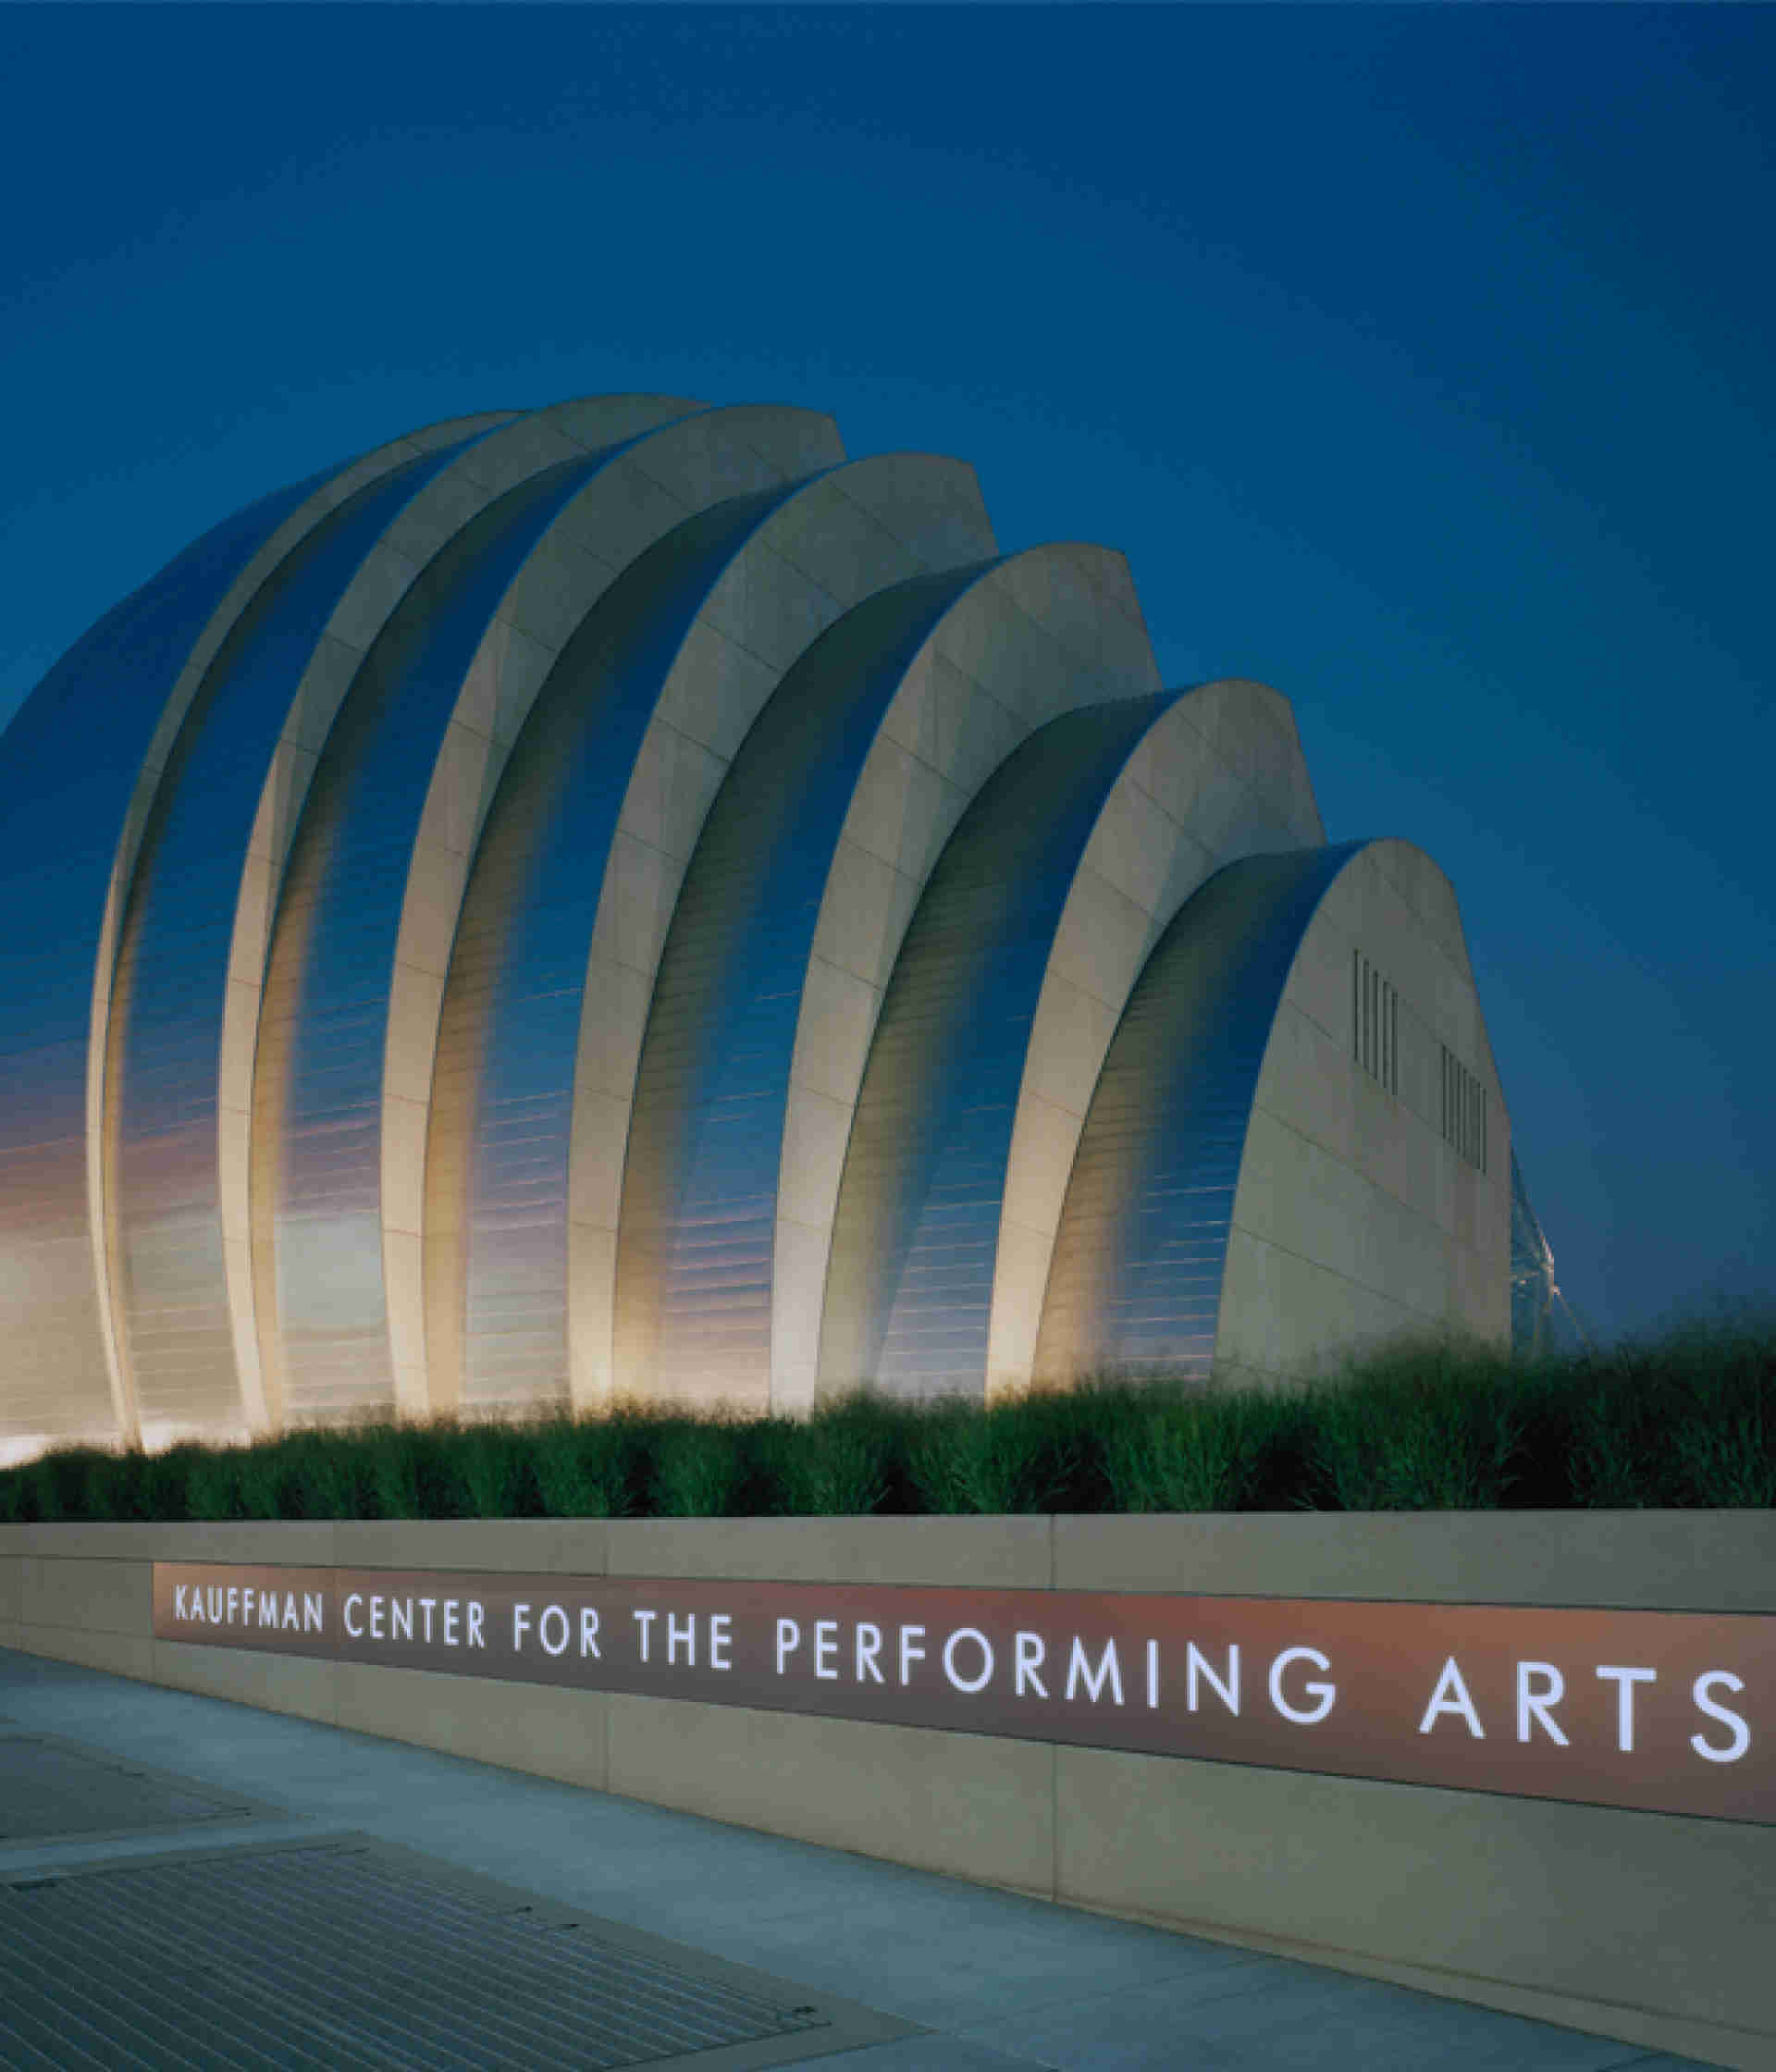 Home - kauffman-center-for-the-performing-arts_624x728